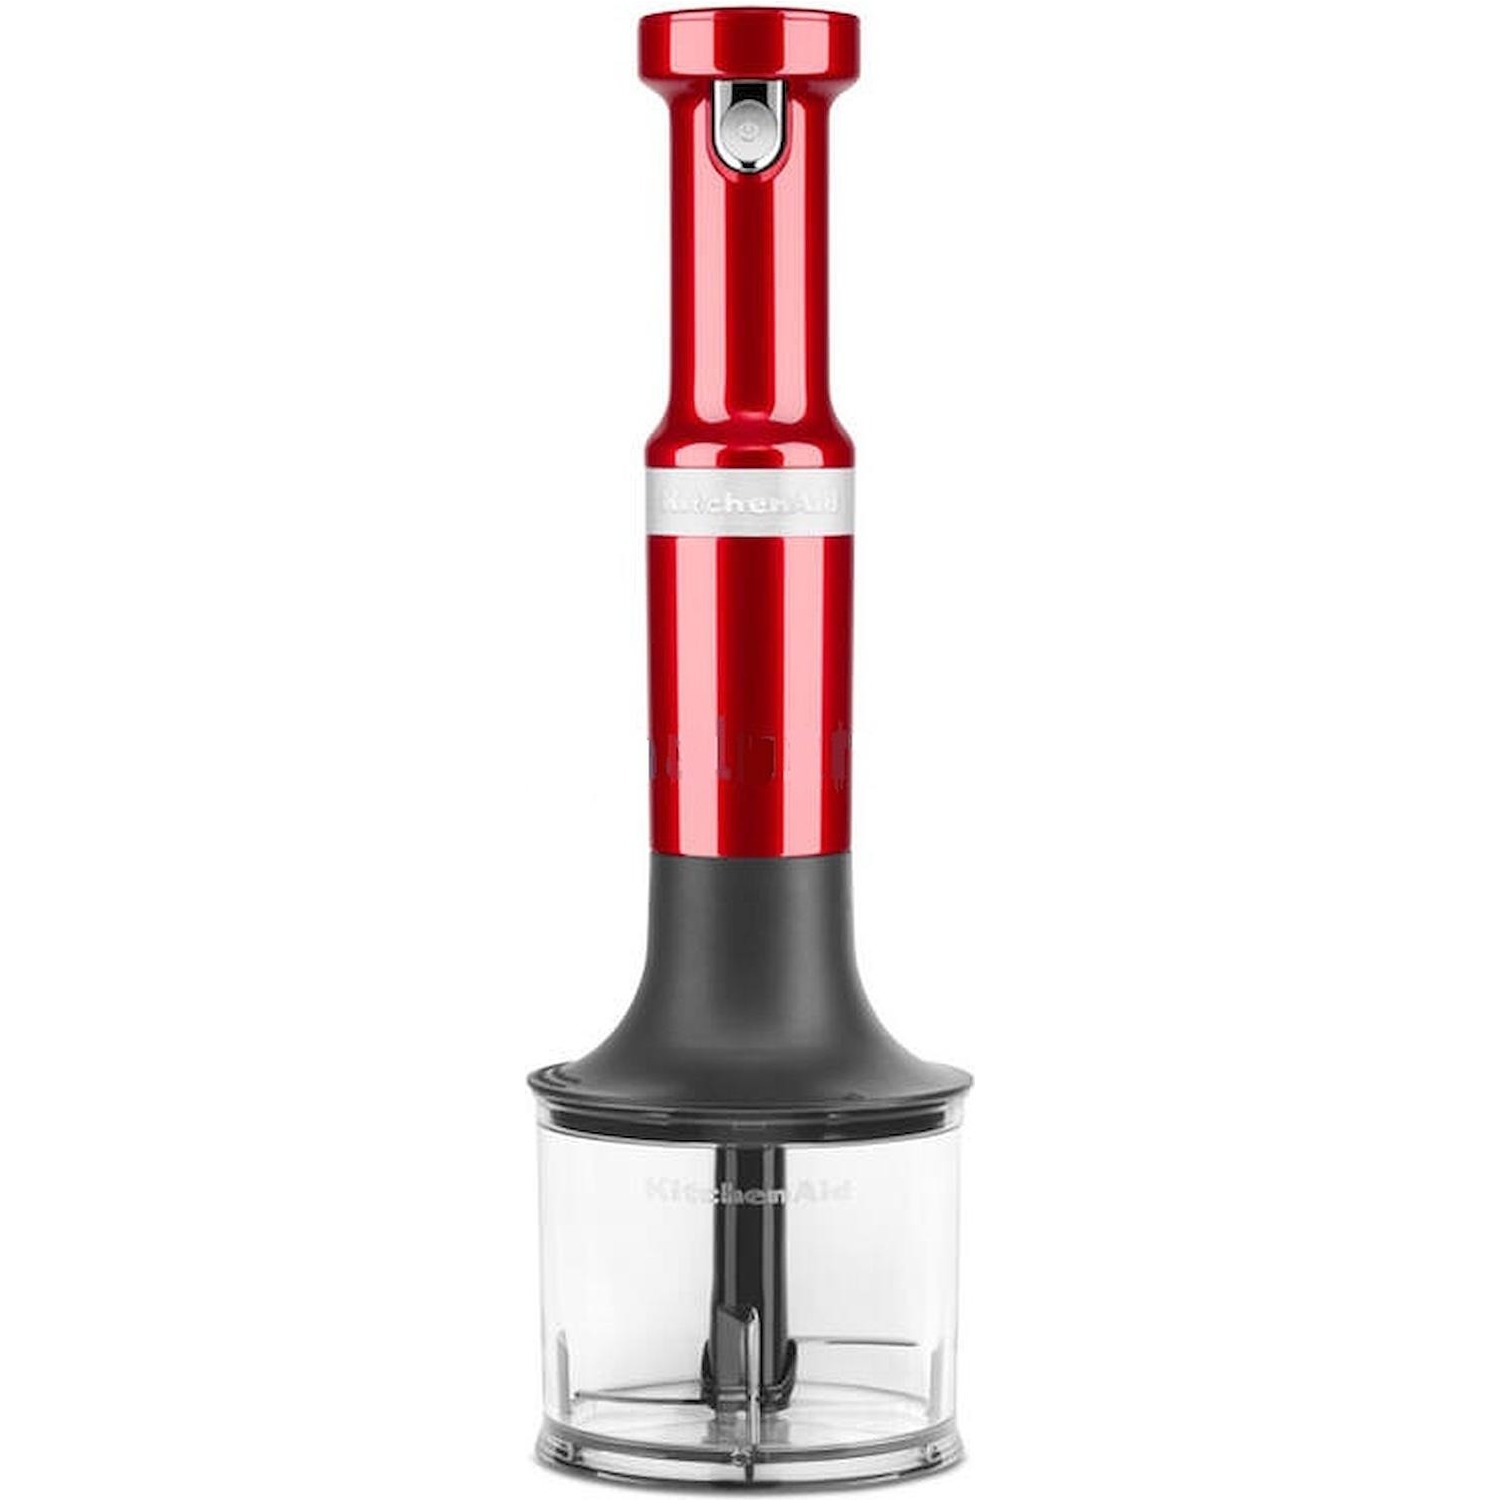 Frullatore ad immersione KitchenAid 5KHBV83EER rosso imperiale - DIMOStore